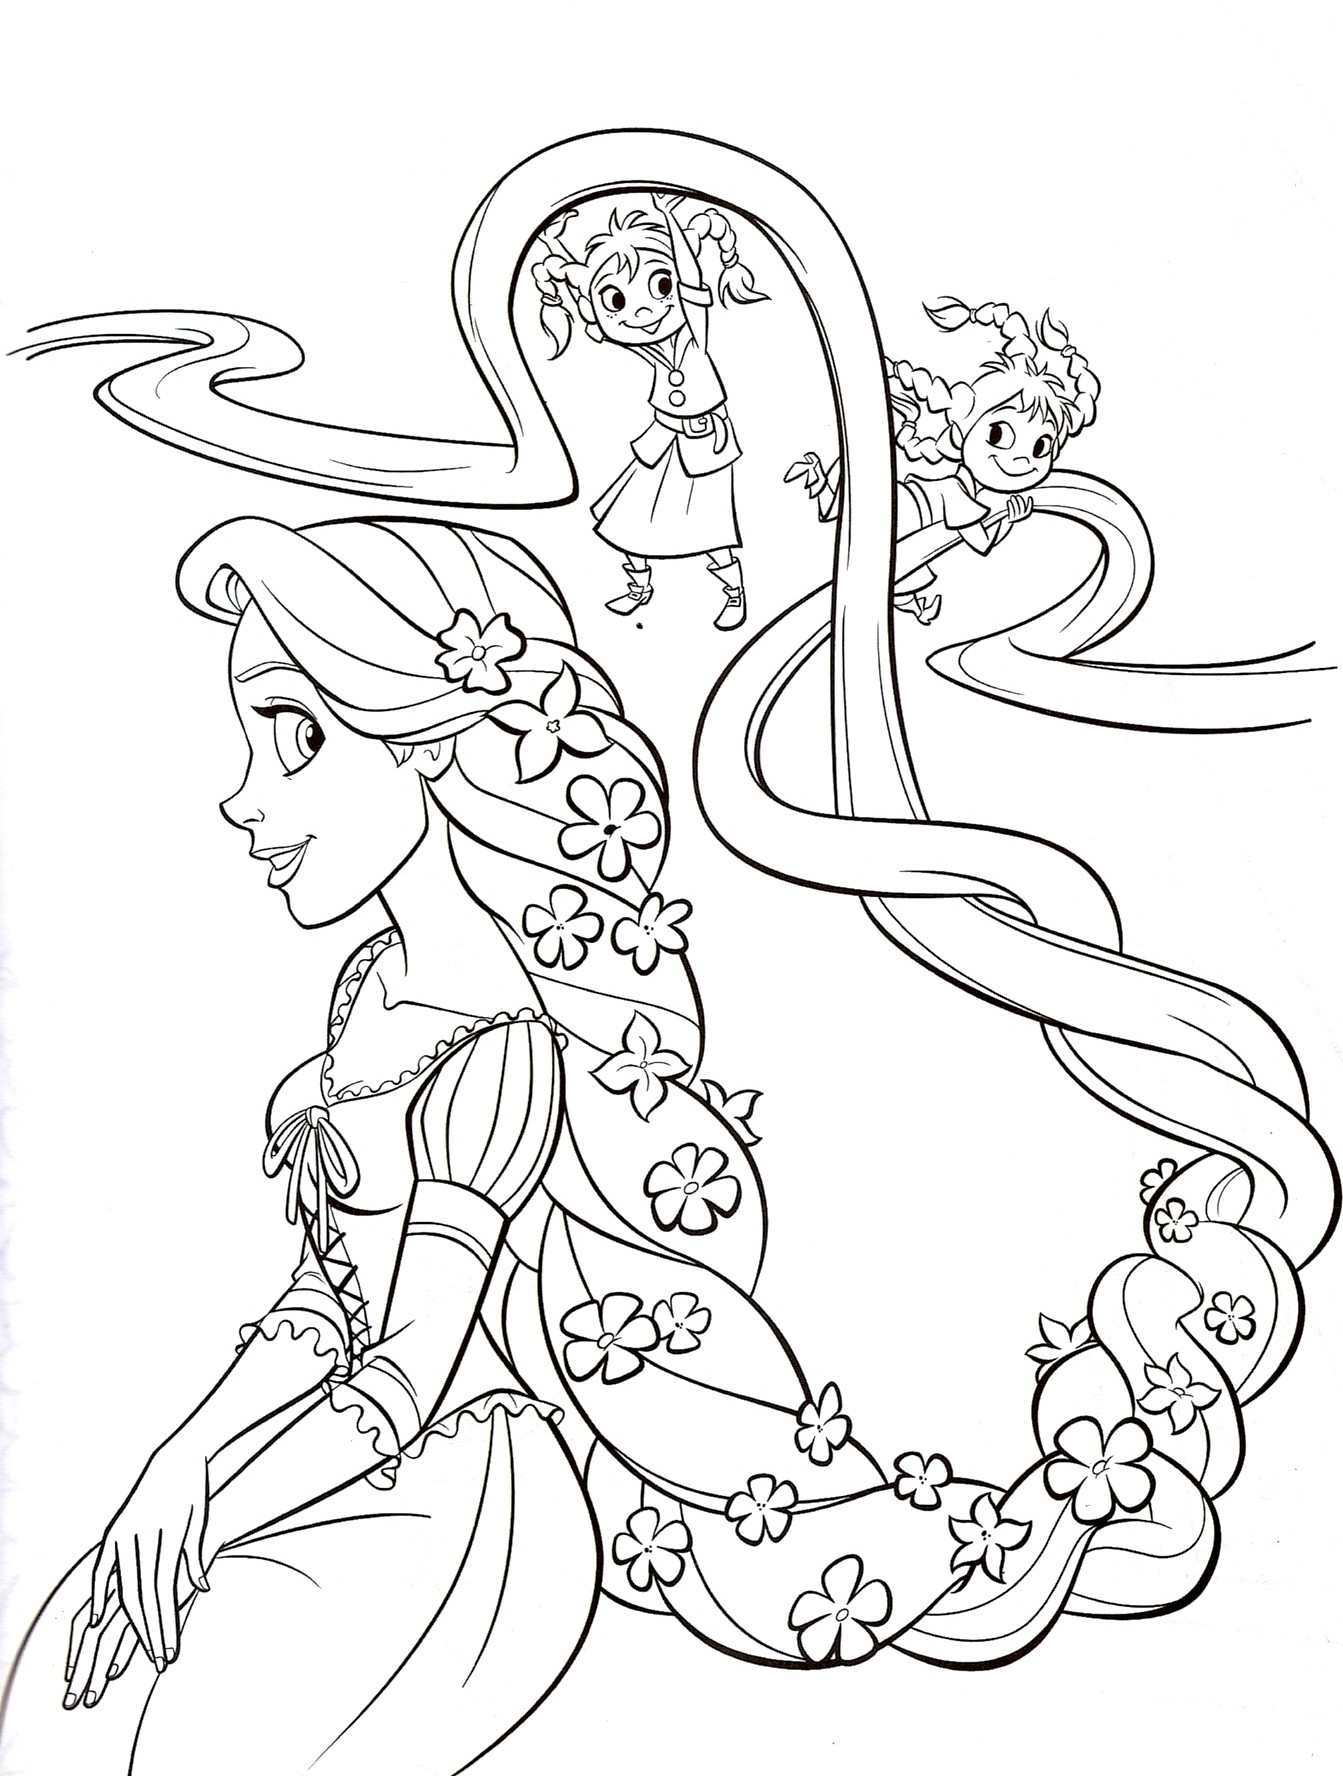 Rapunzel Printable Coloring Pages
 Tangled Coloring Pages